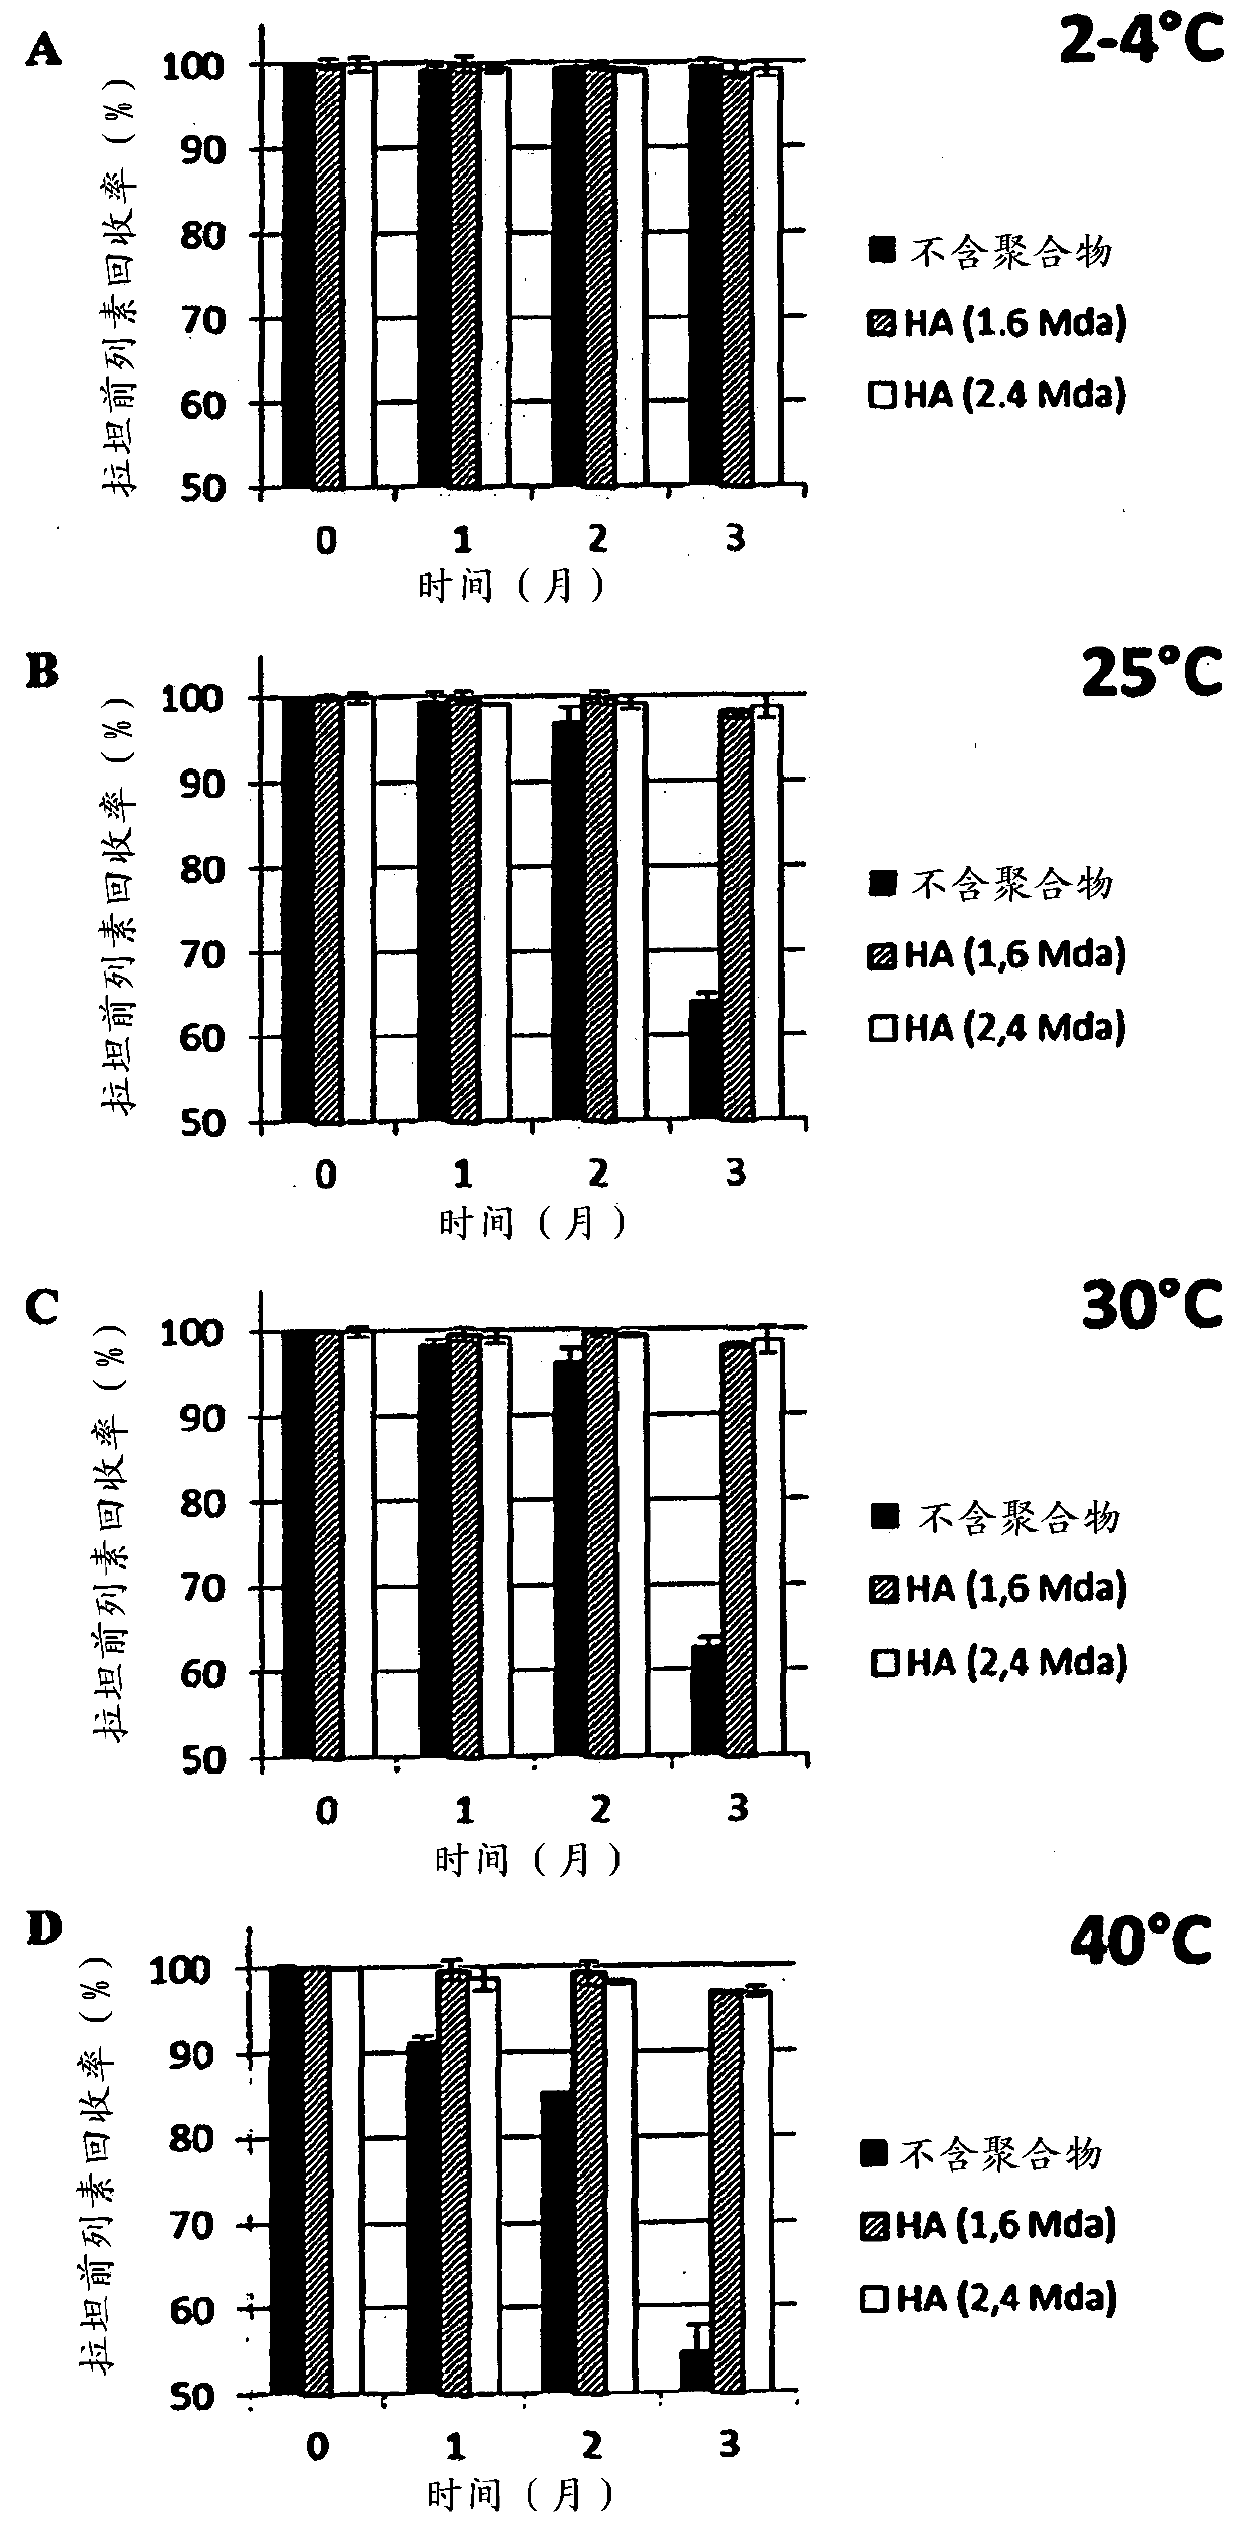 Ophthalmic compositions comprising prostaglandin f2α derivatives and hyaluronic acid